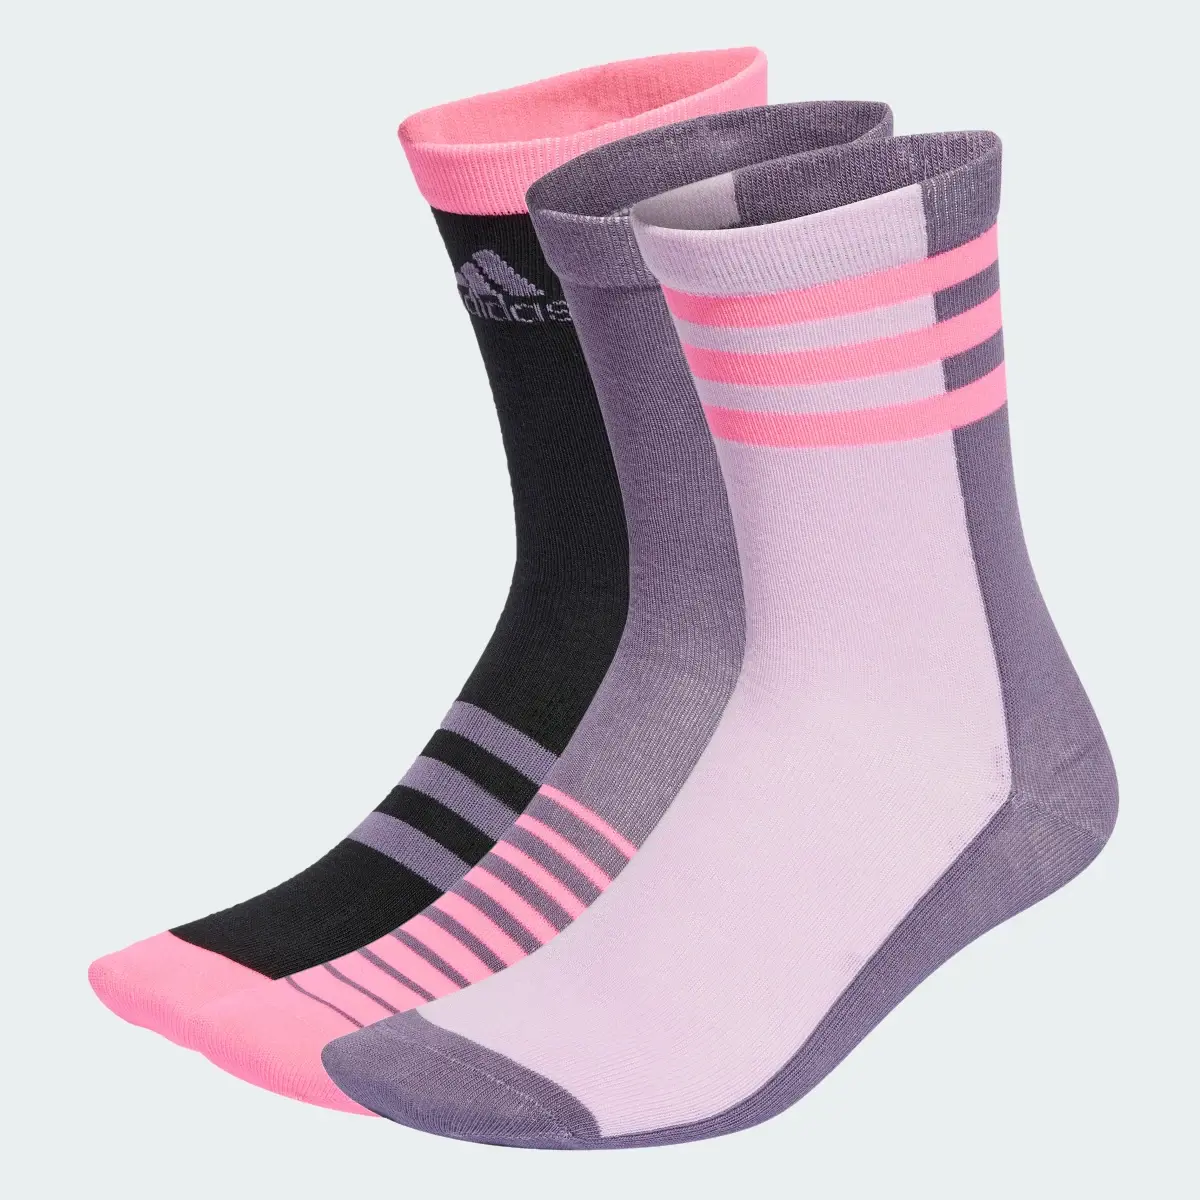 Adidas Chaussettes mi-mollet International Girls Day (3 paires). 3